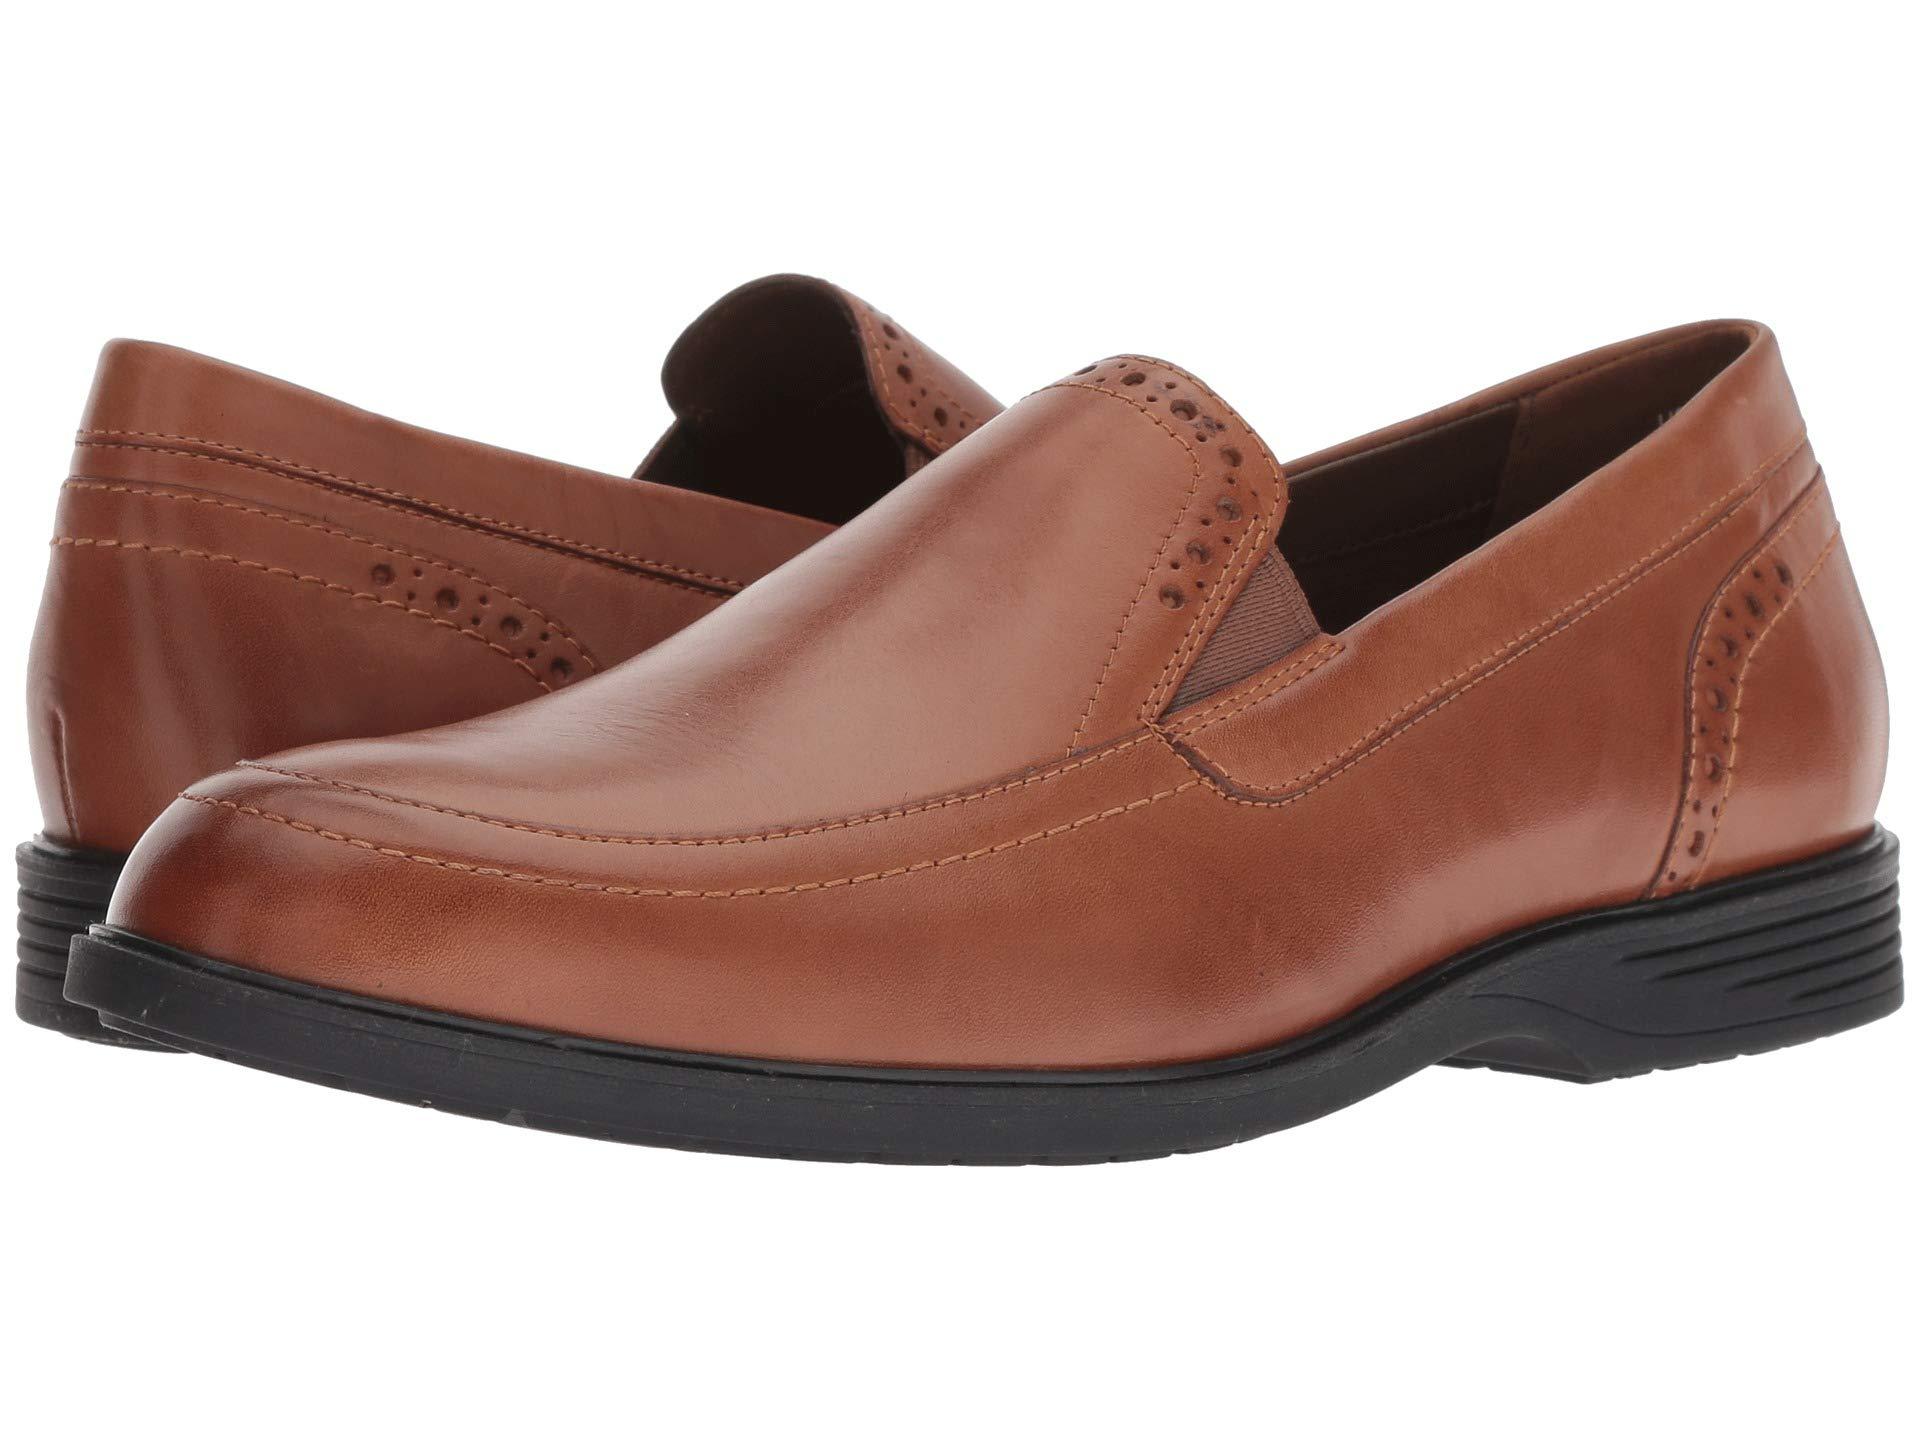 Hush Puppies Leather Shepsky Slip-on in Dark Tan Leather (Brown) for ...